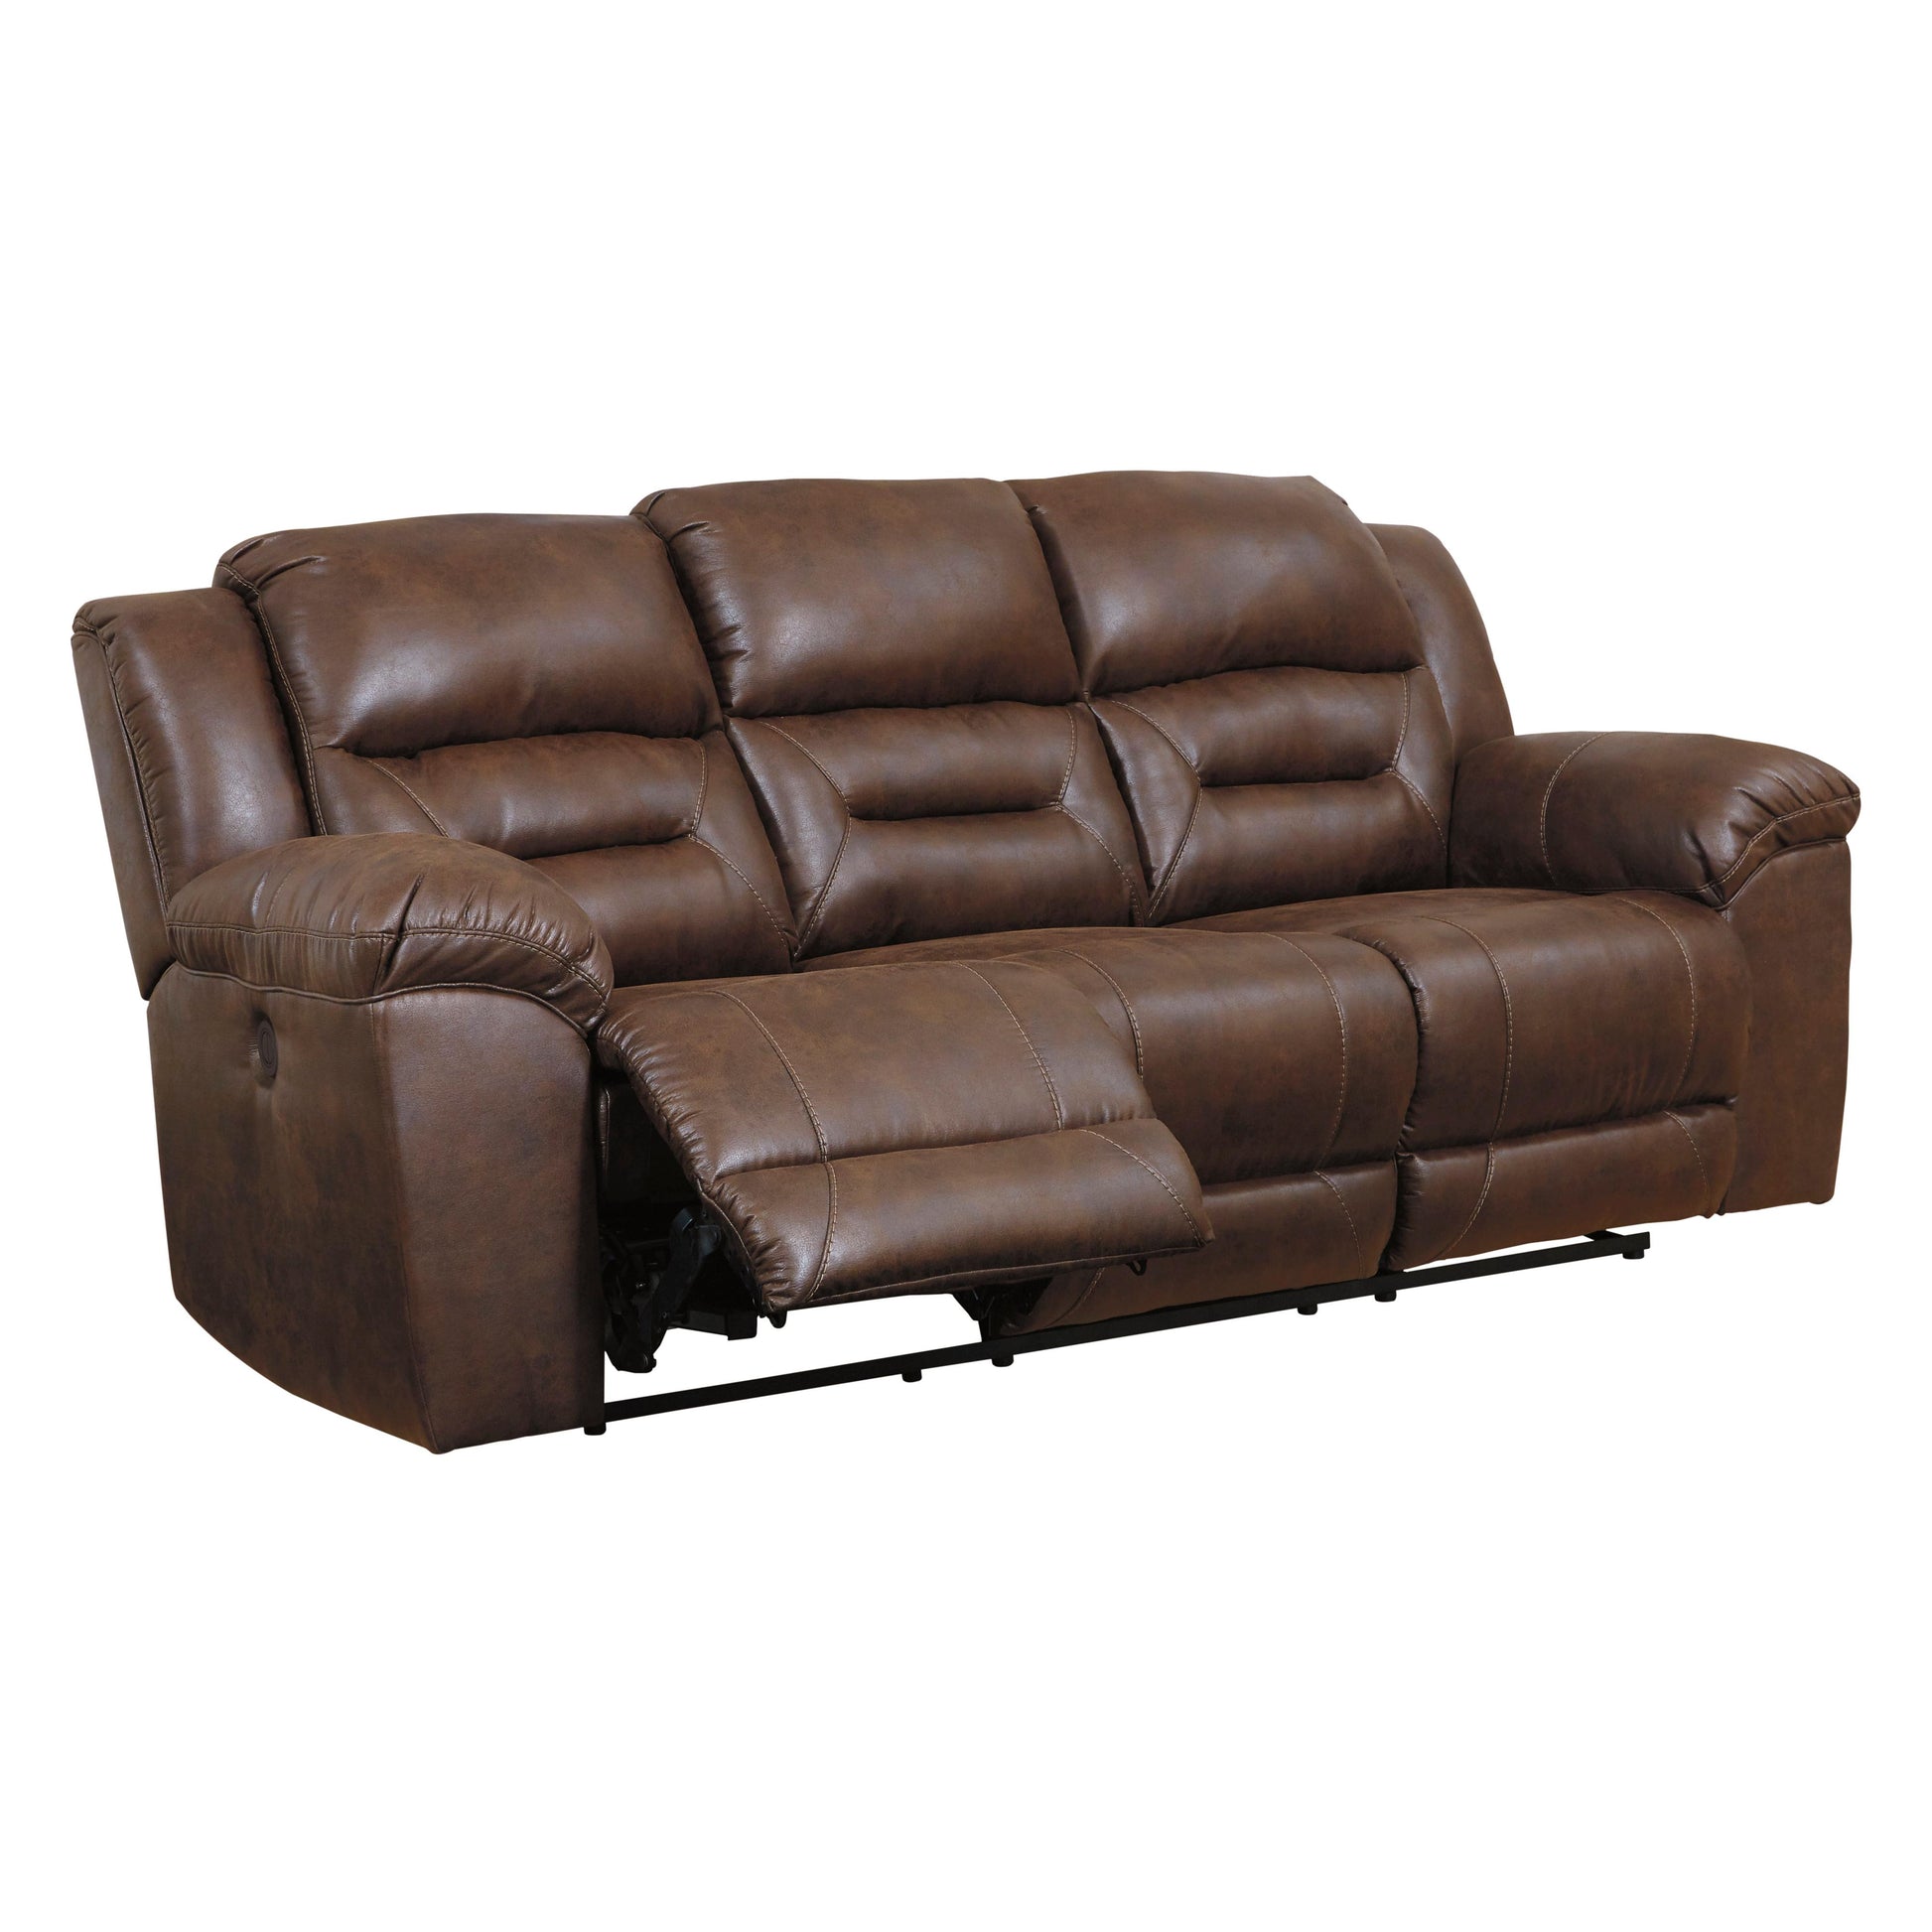 Signature Design by Ashley Stoneland Power Reclining Leather Look Sofa 3990487